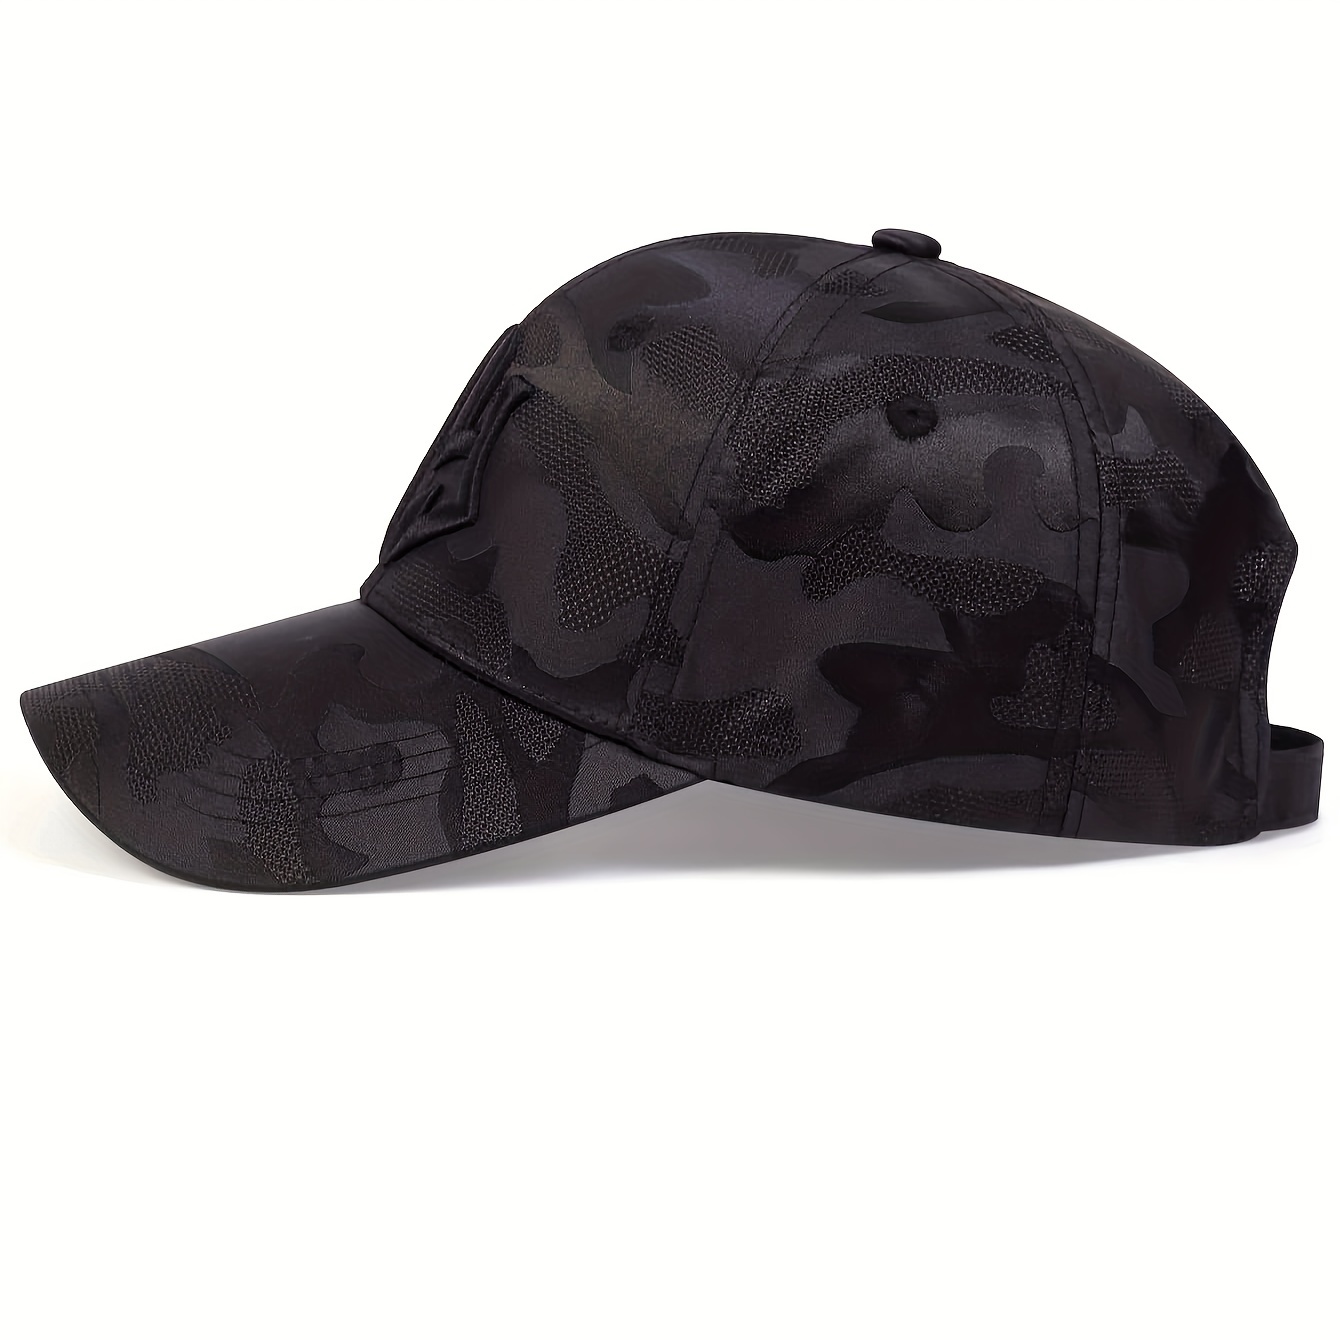 Under Armour Travel Hats for Men